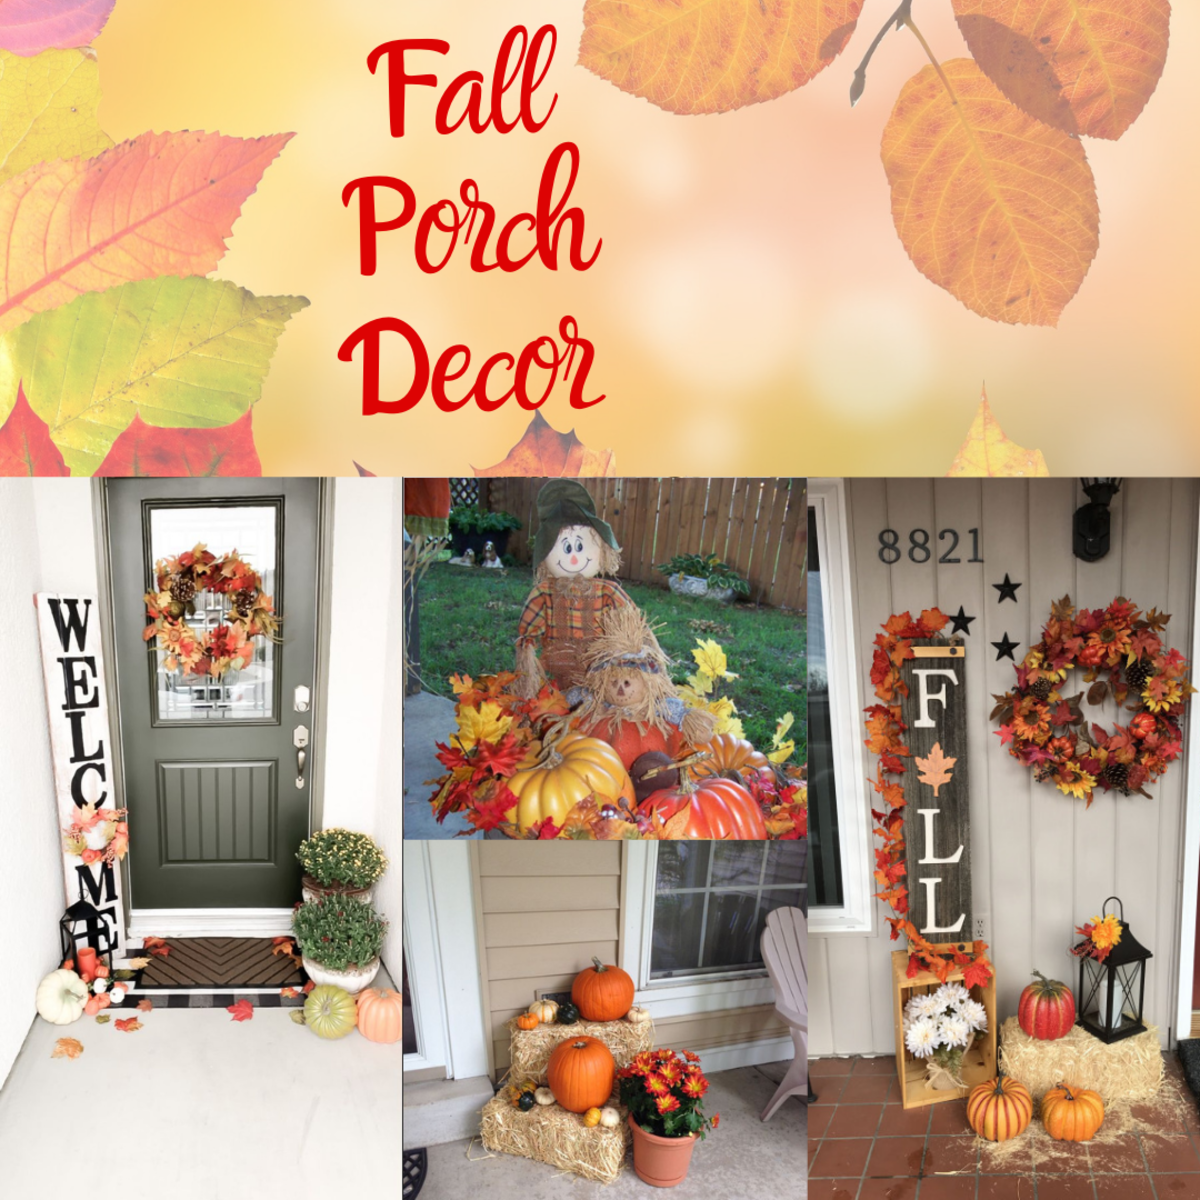 50+ Stunning DIY Fall Front Porch Decor Ideas to Bring a Cozy and Rustic Vibe to Your Outdoors